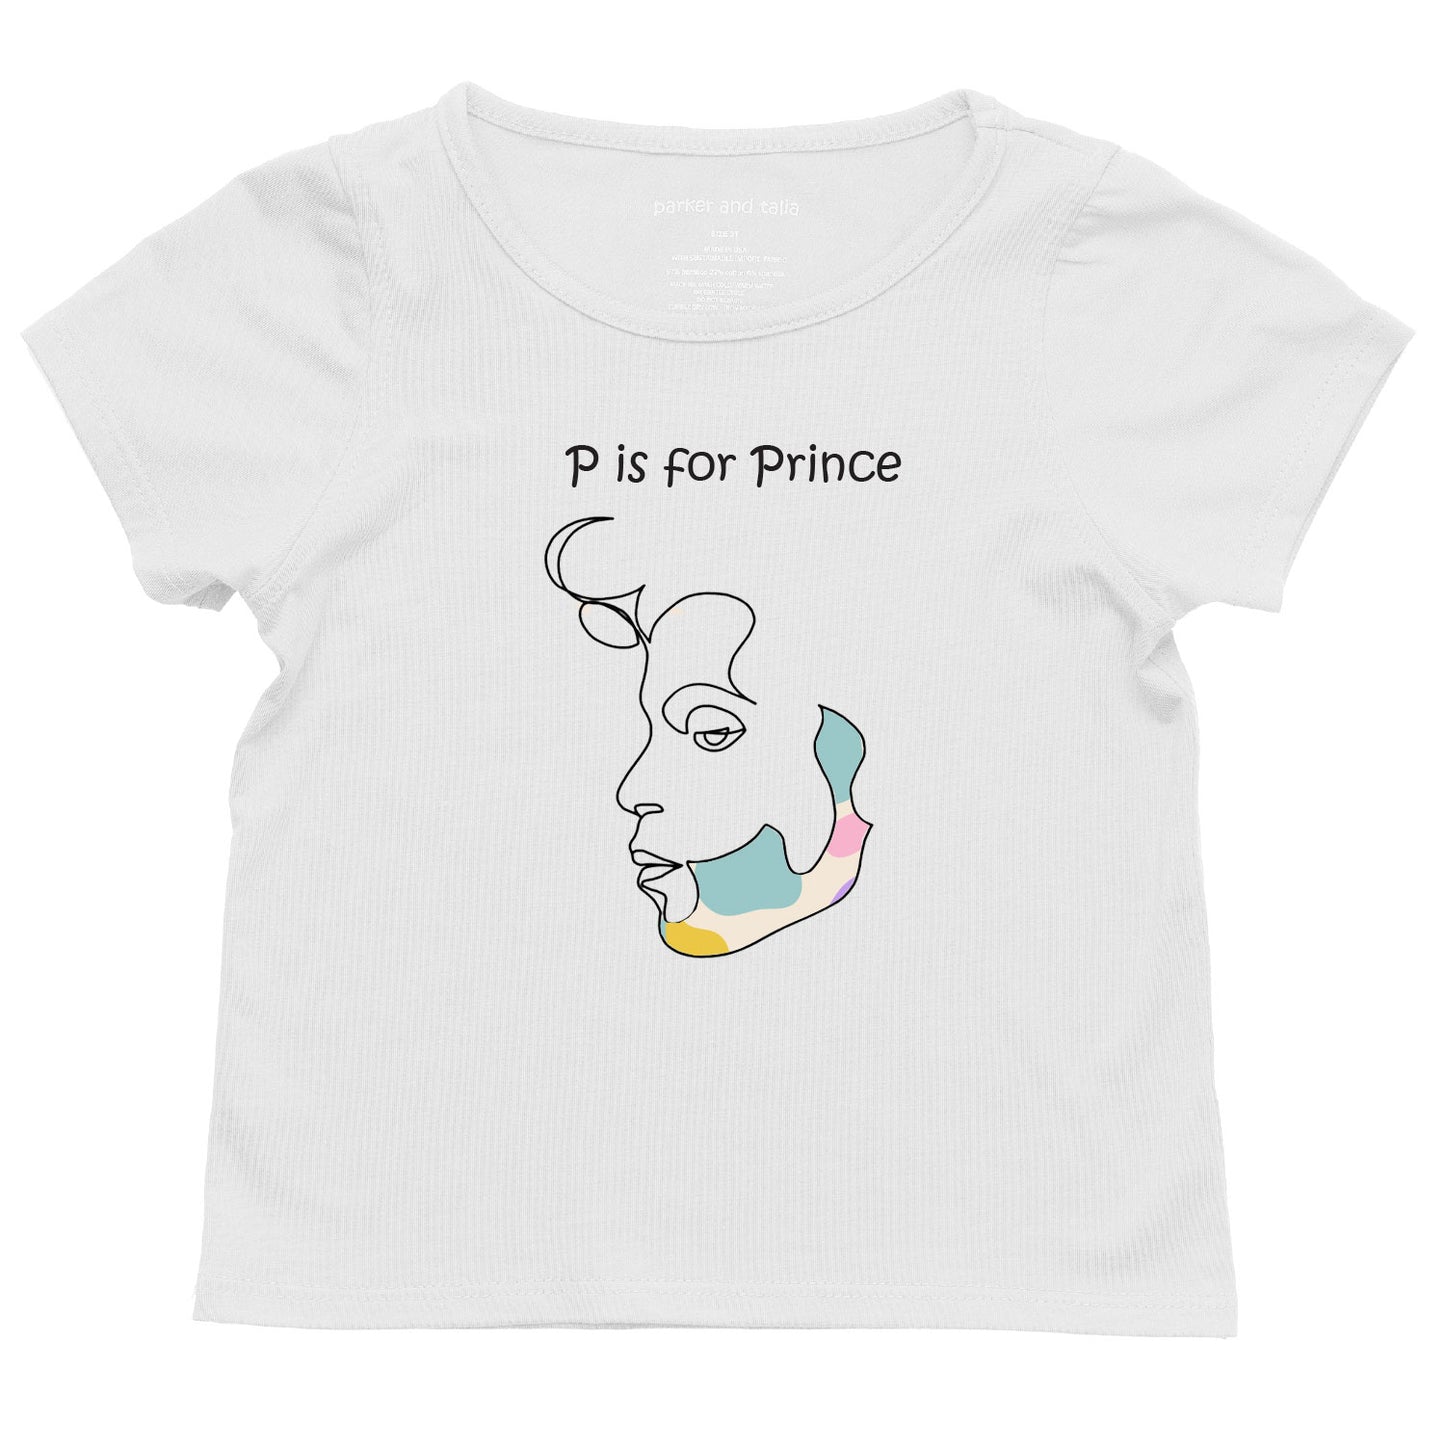 The Everyday Graphic Tee: P is for Prince